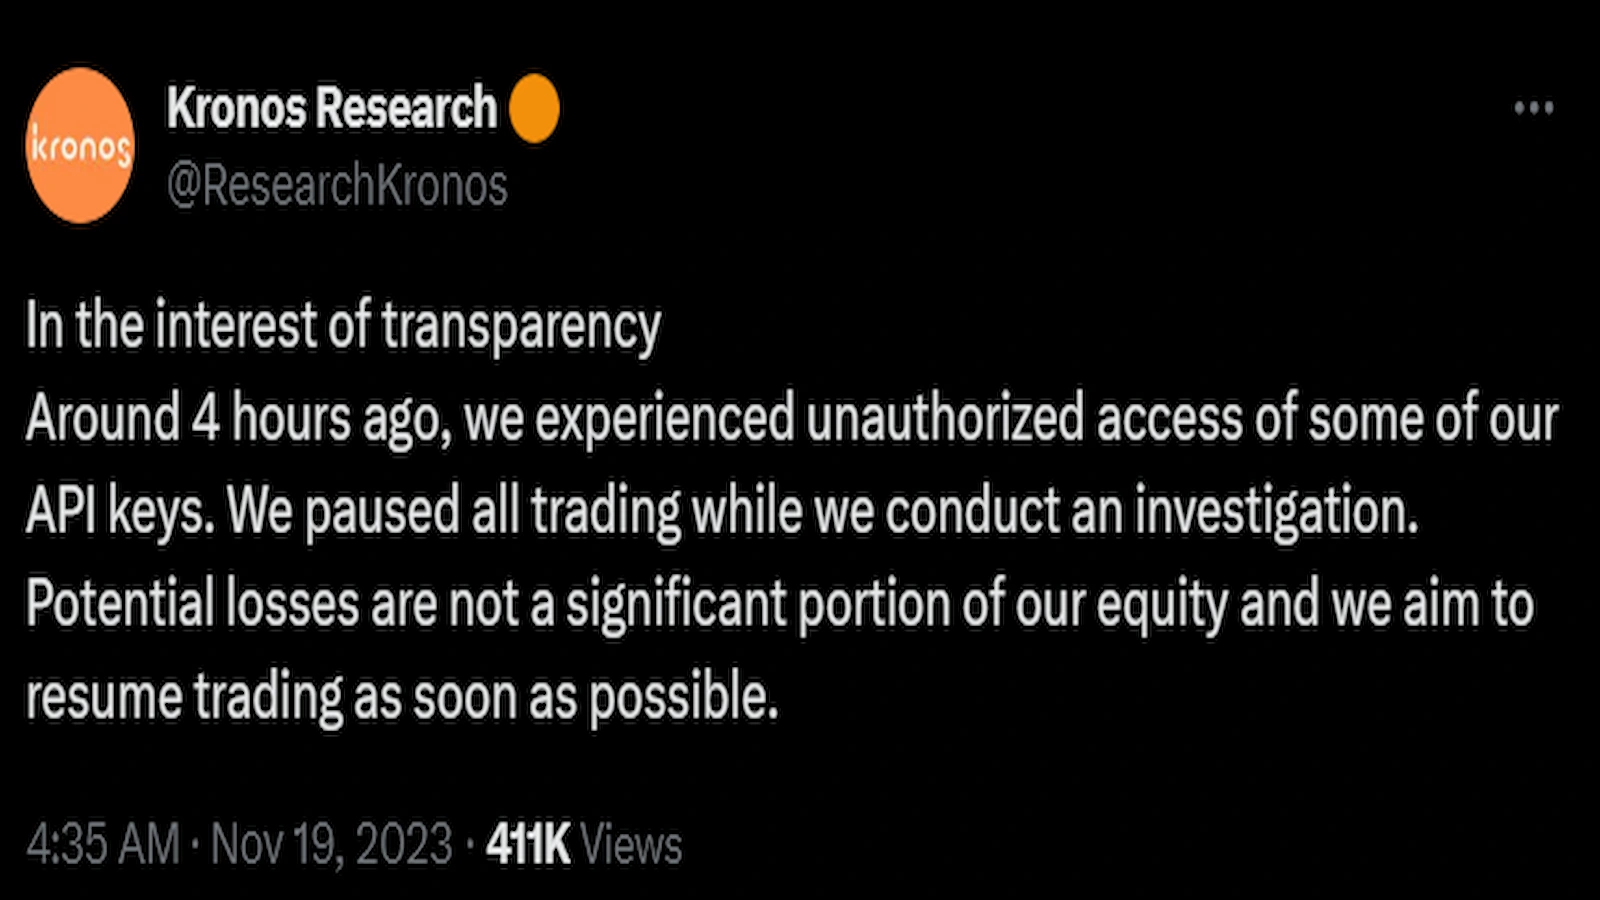 WOO Network's Kronos Research hacked